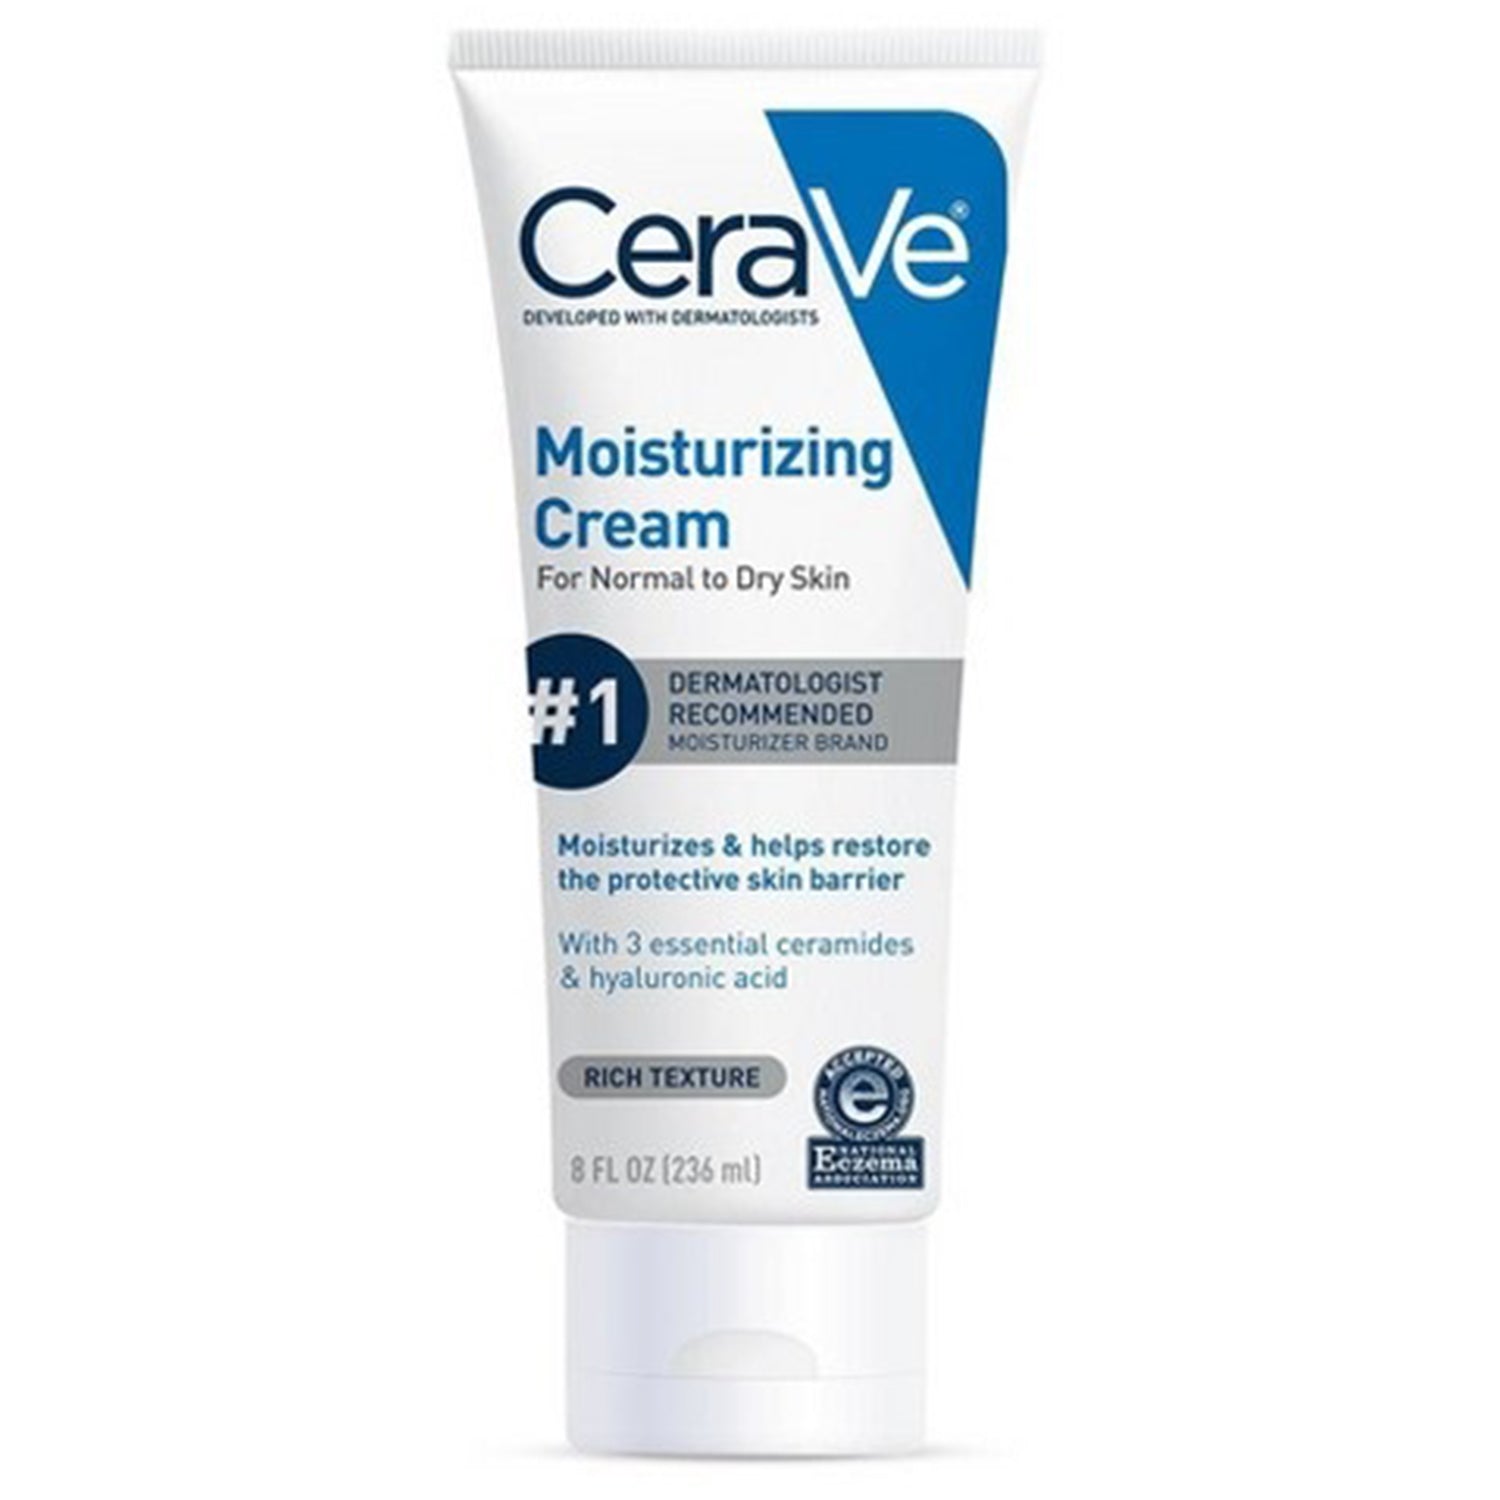 Shop Cerave daily moisturizing cream for dry skin available at Heygirl.pk for delivery in Pakistan